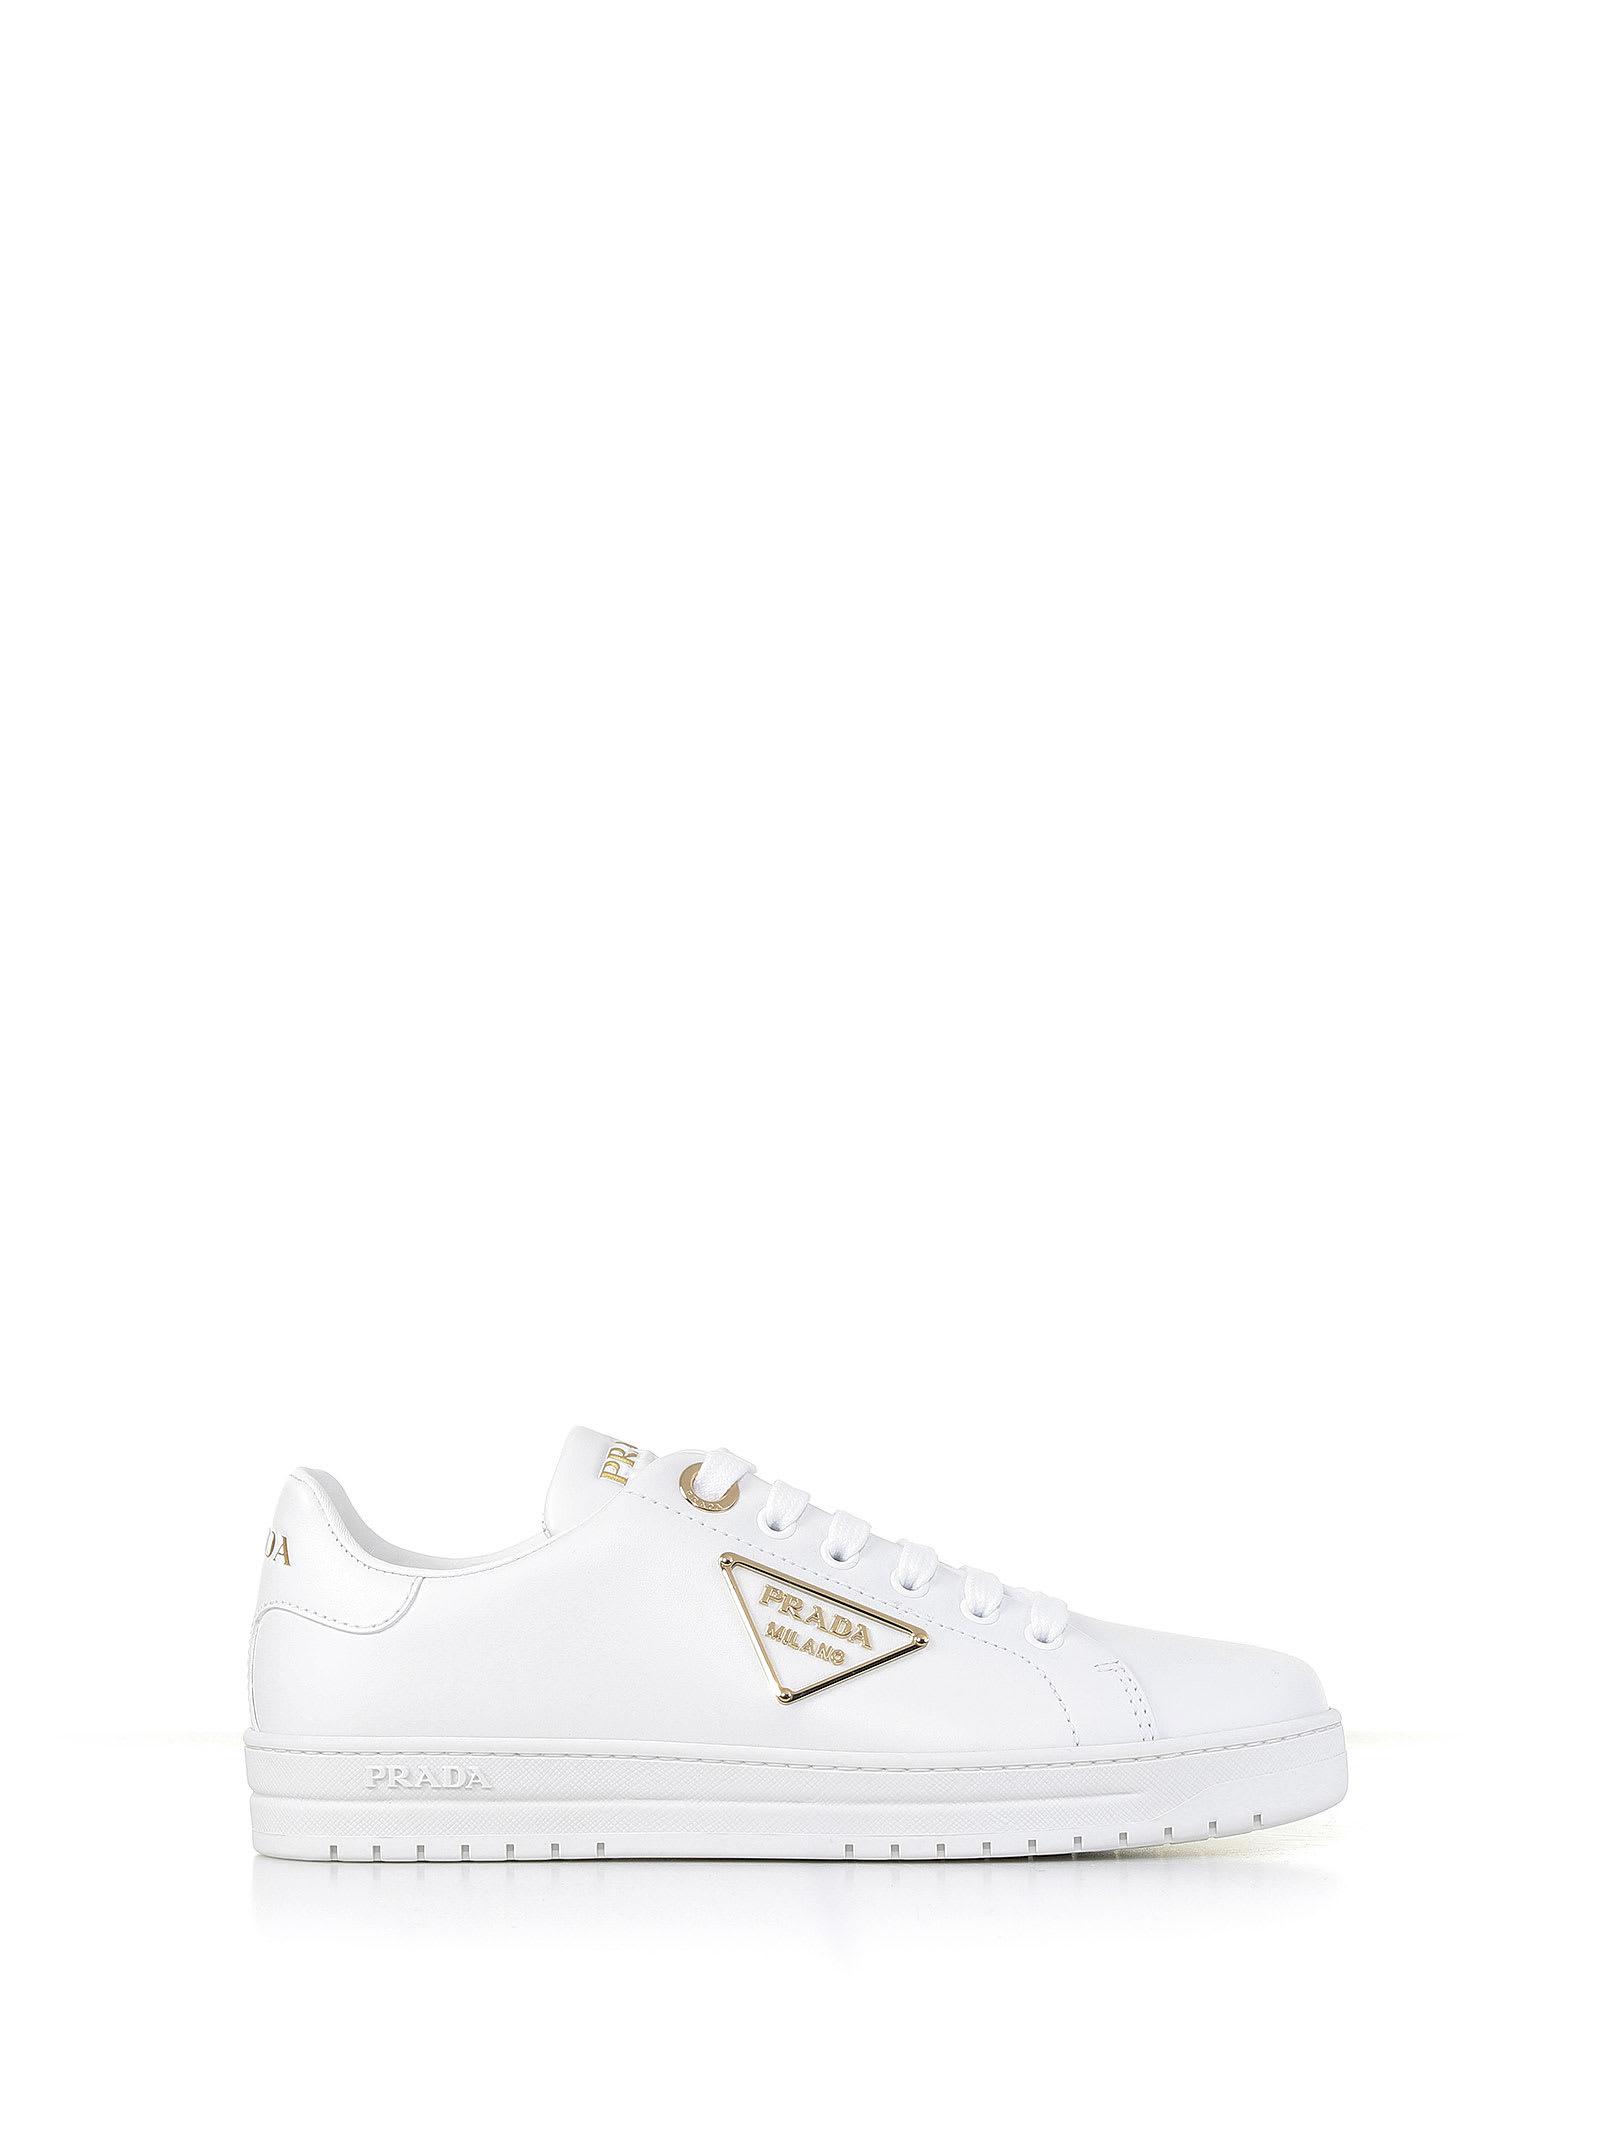 Prada Leather Sneaker With Logo in White | Lyst